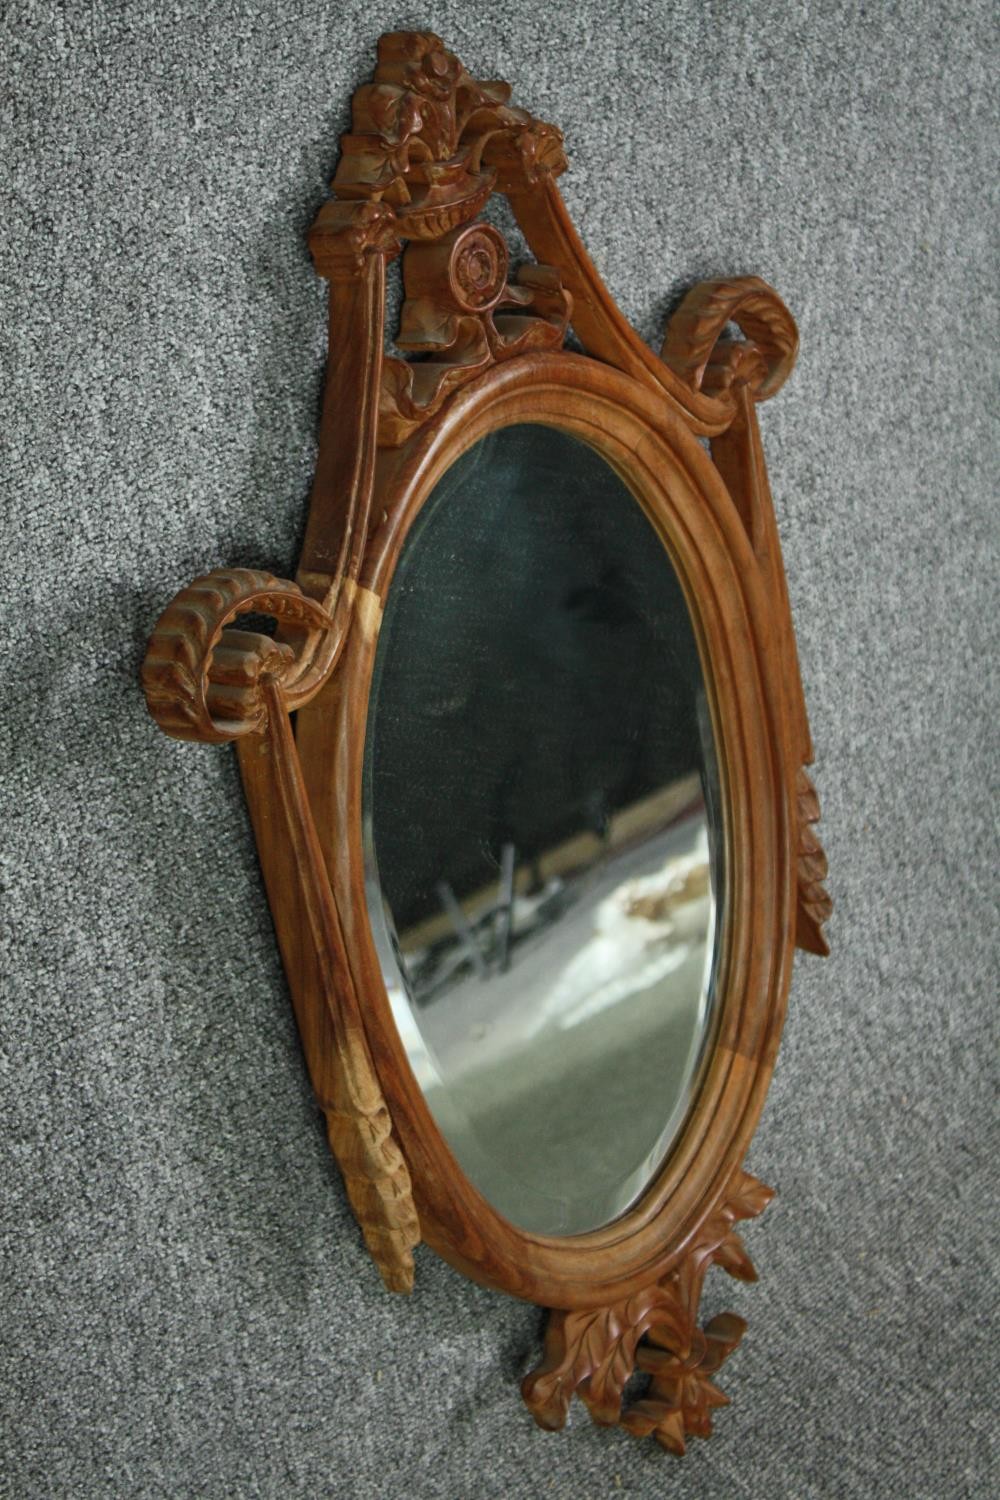 Wall mirror, 19th century style carved hardwood with swags and husks and fitted with a bevelled - Image 2 of 4